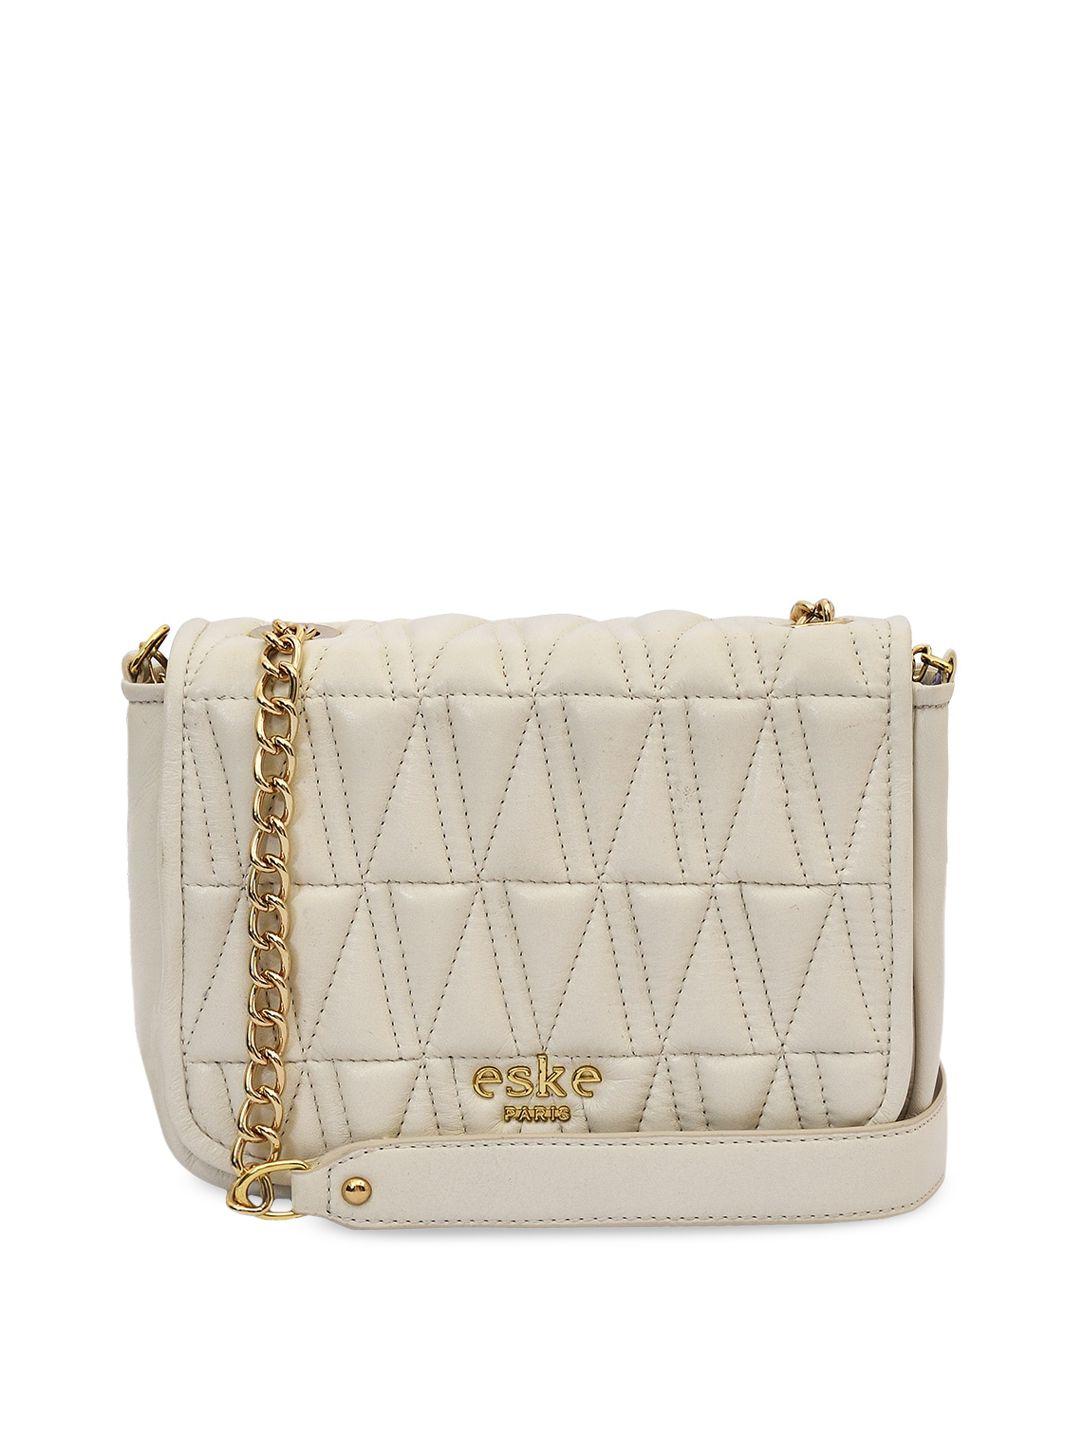 eske white textured leather structured sling bag with quilted